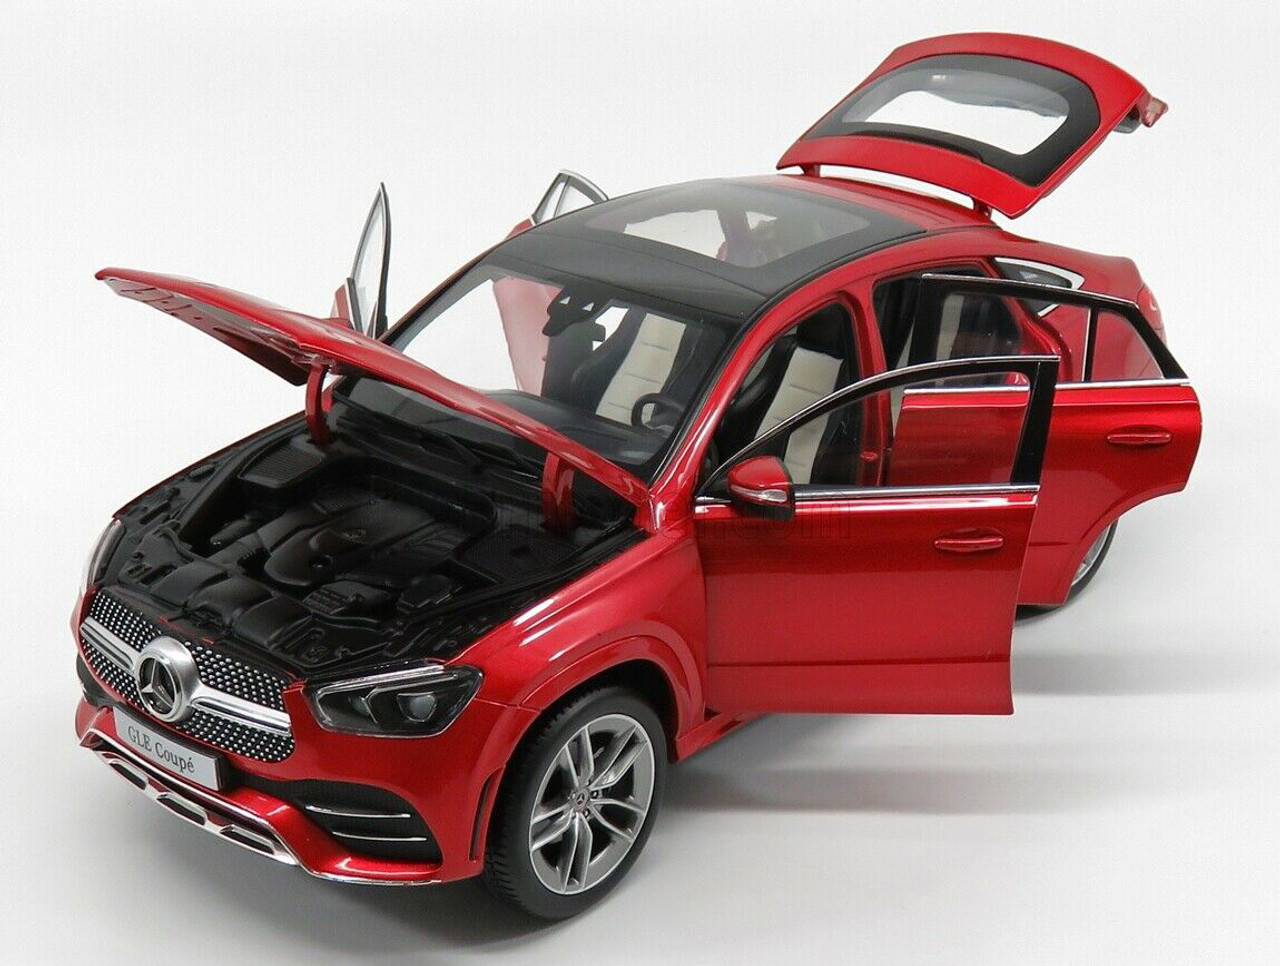 1/18 Dealer Edition Mercedes-Benz Mercedes GLE Coupe (Red) Diecast 